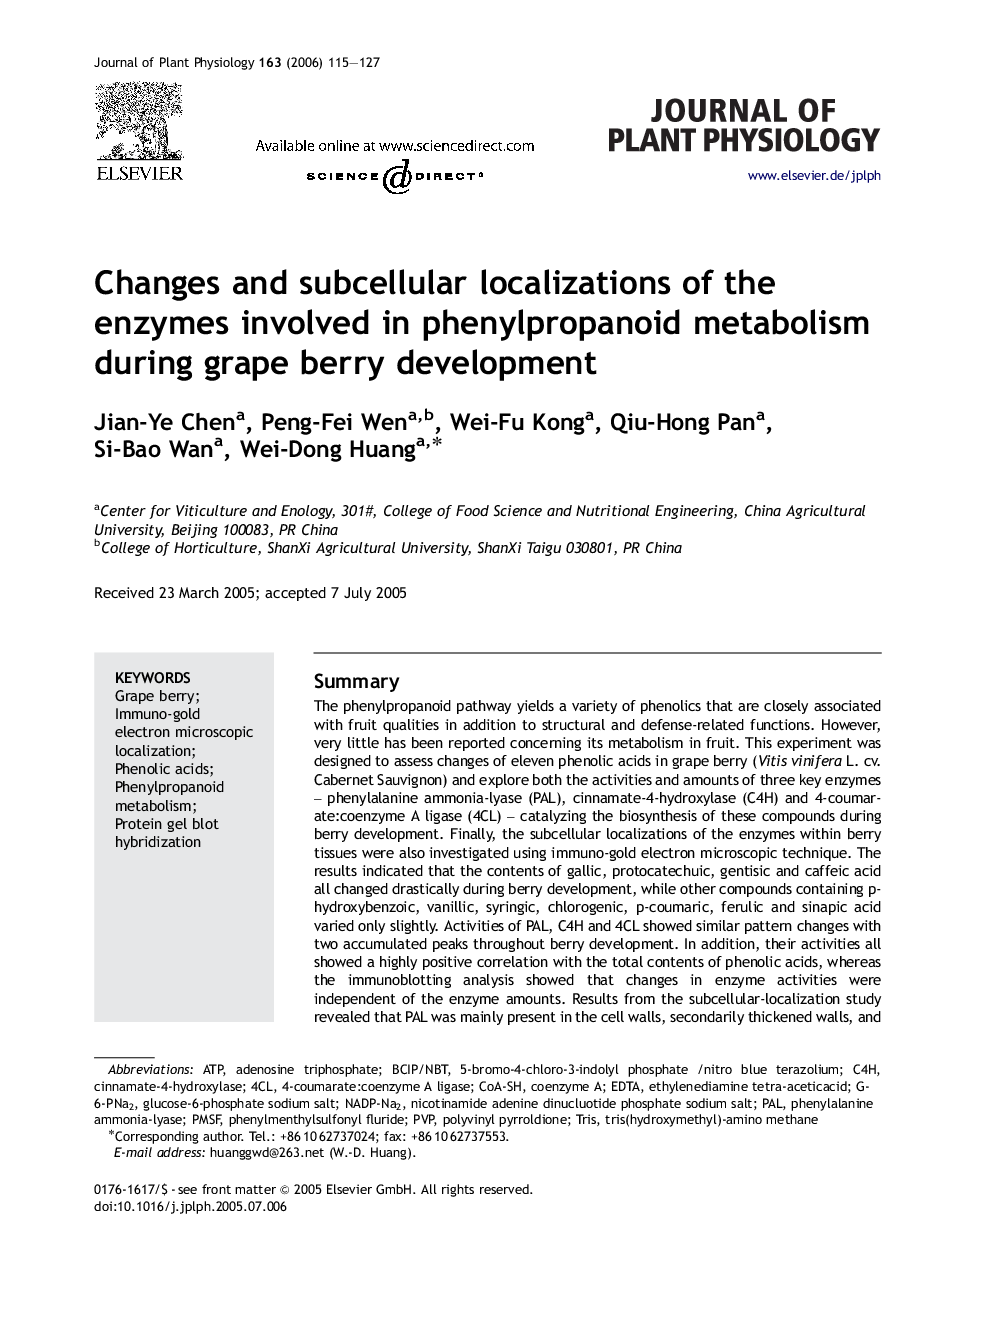 Changes and subcellular localizations of the enzymes involved in phenylpropanoid metabolism during grape berry development